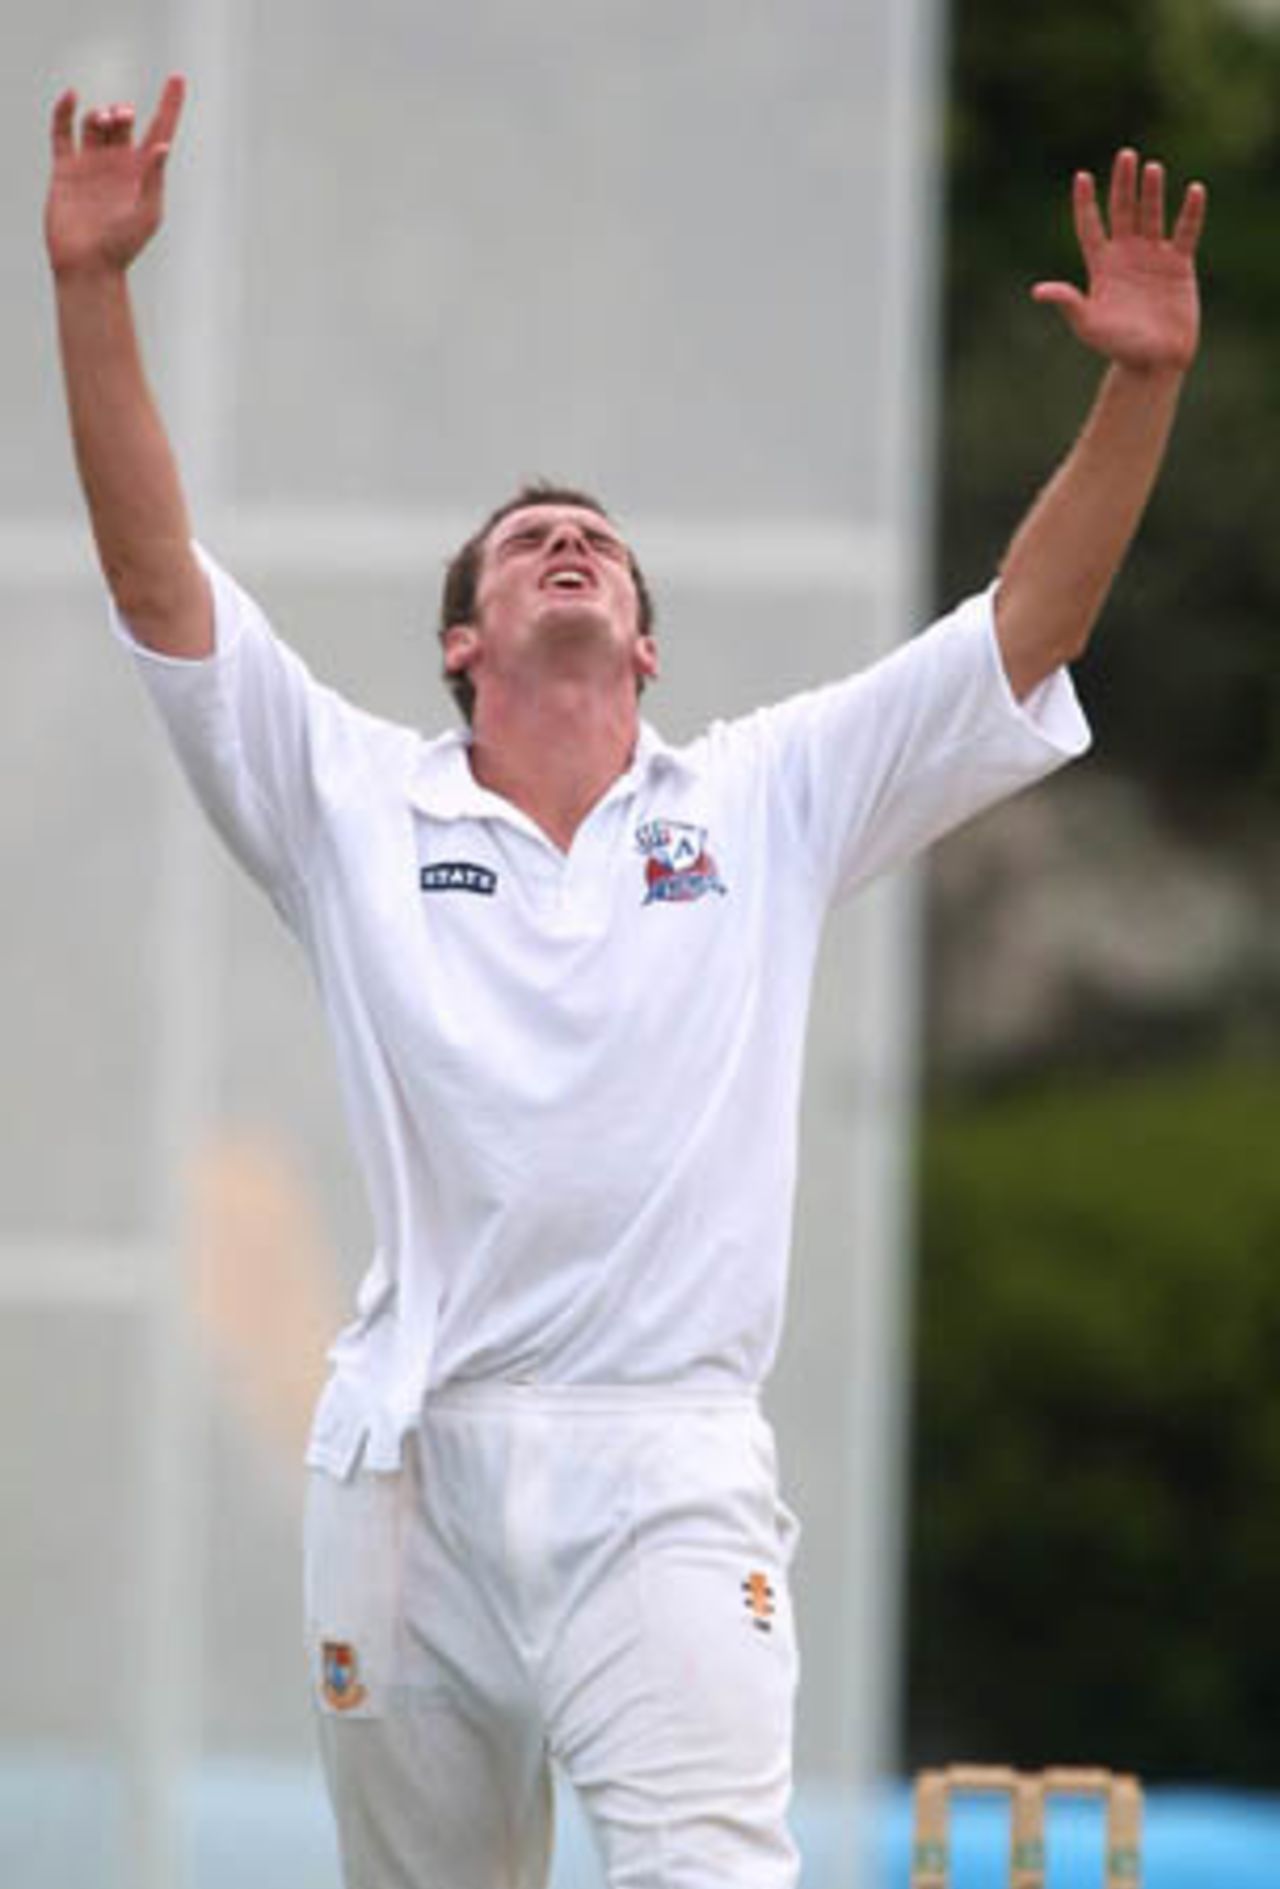 Auckland bowler Kyle Mills looks to the heavens as an appeal for lbw is turned down during his spell of 1-39 from 19 overs. Tour match: Auckland v Bangladeshis at Eden Park Outer Oval, Auckland, 12-15 Dec 2001 (12 December 2001).